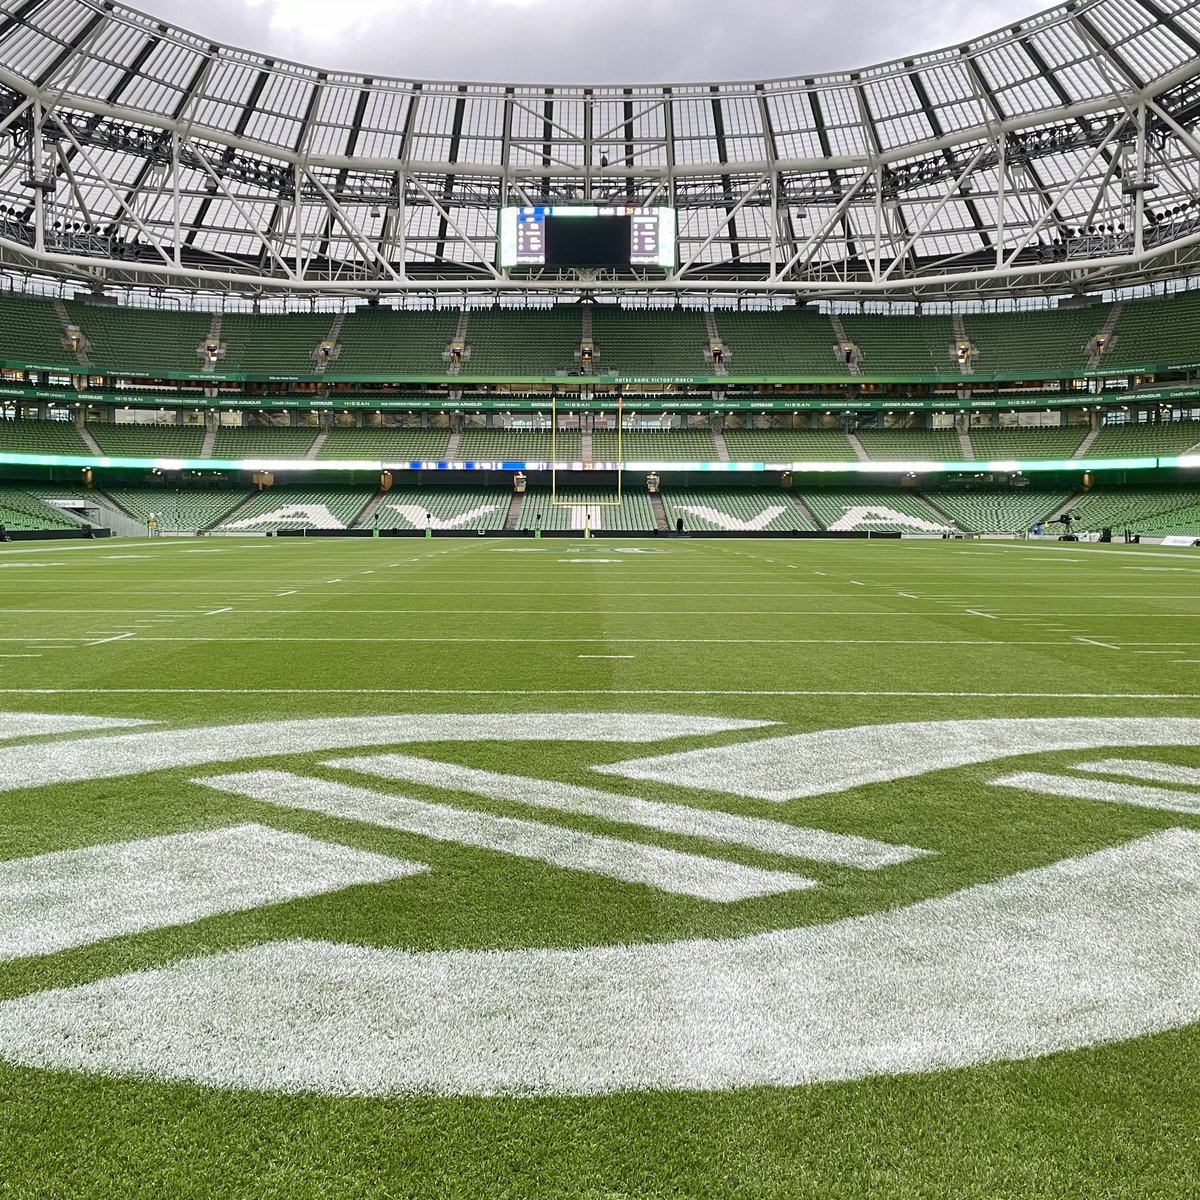 The stage is set! 🏟️ Tomorrow, @NDFootball and @NavyFB will kick off the 2023 Aer Lingus College Football Classic at Dublin’s @AVIVAStadium! Who’s ready for Game Day?? 👋🏈 #MuchMoreThanAGame | #TouchdownIreland